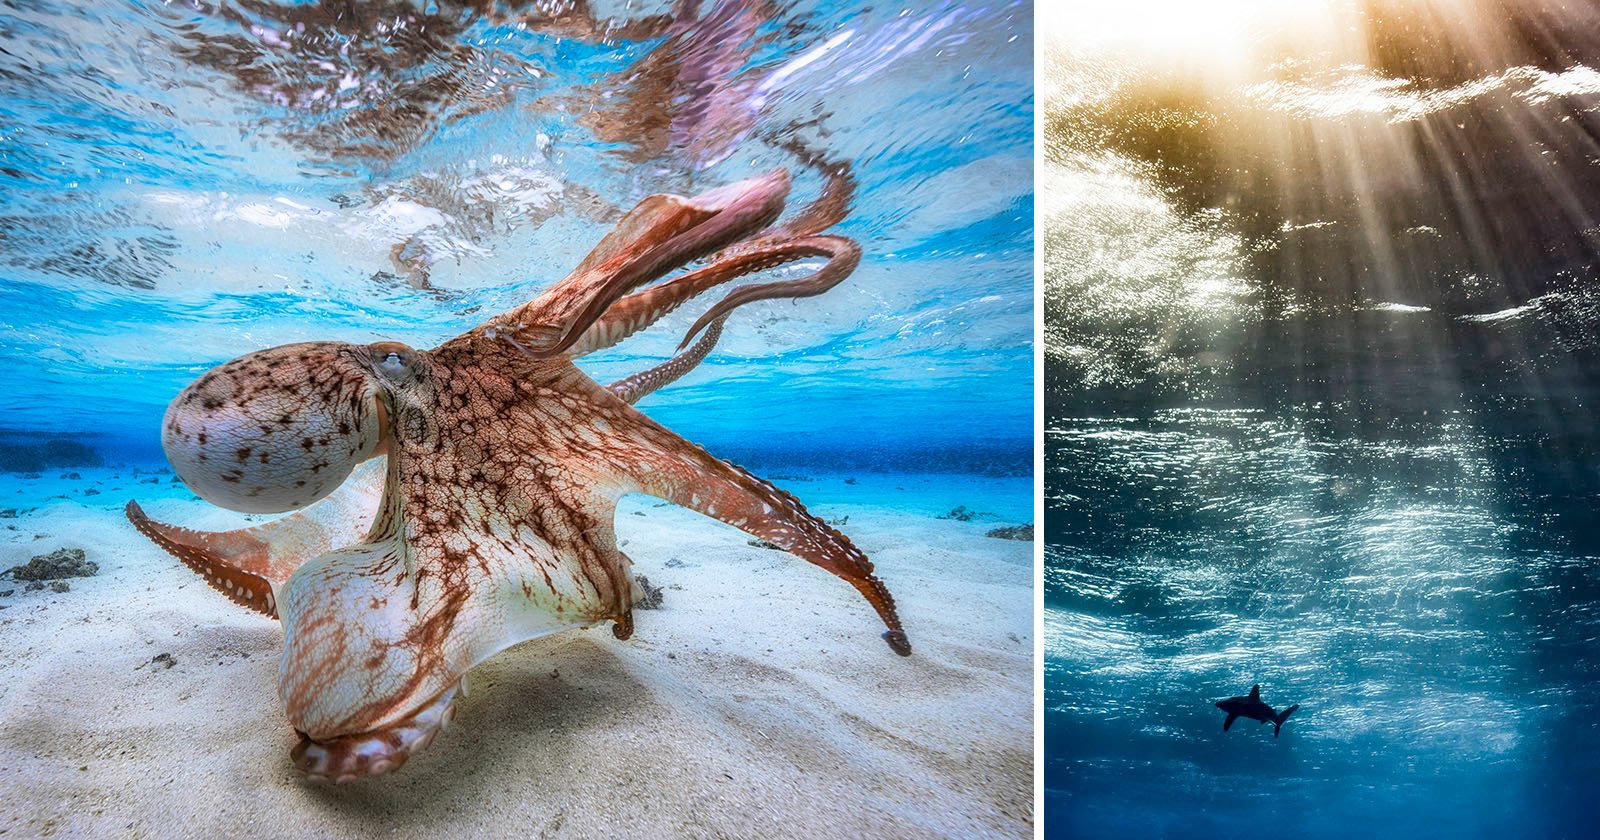 The Winning Photos of Underwater Photographer of the Year 2017